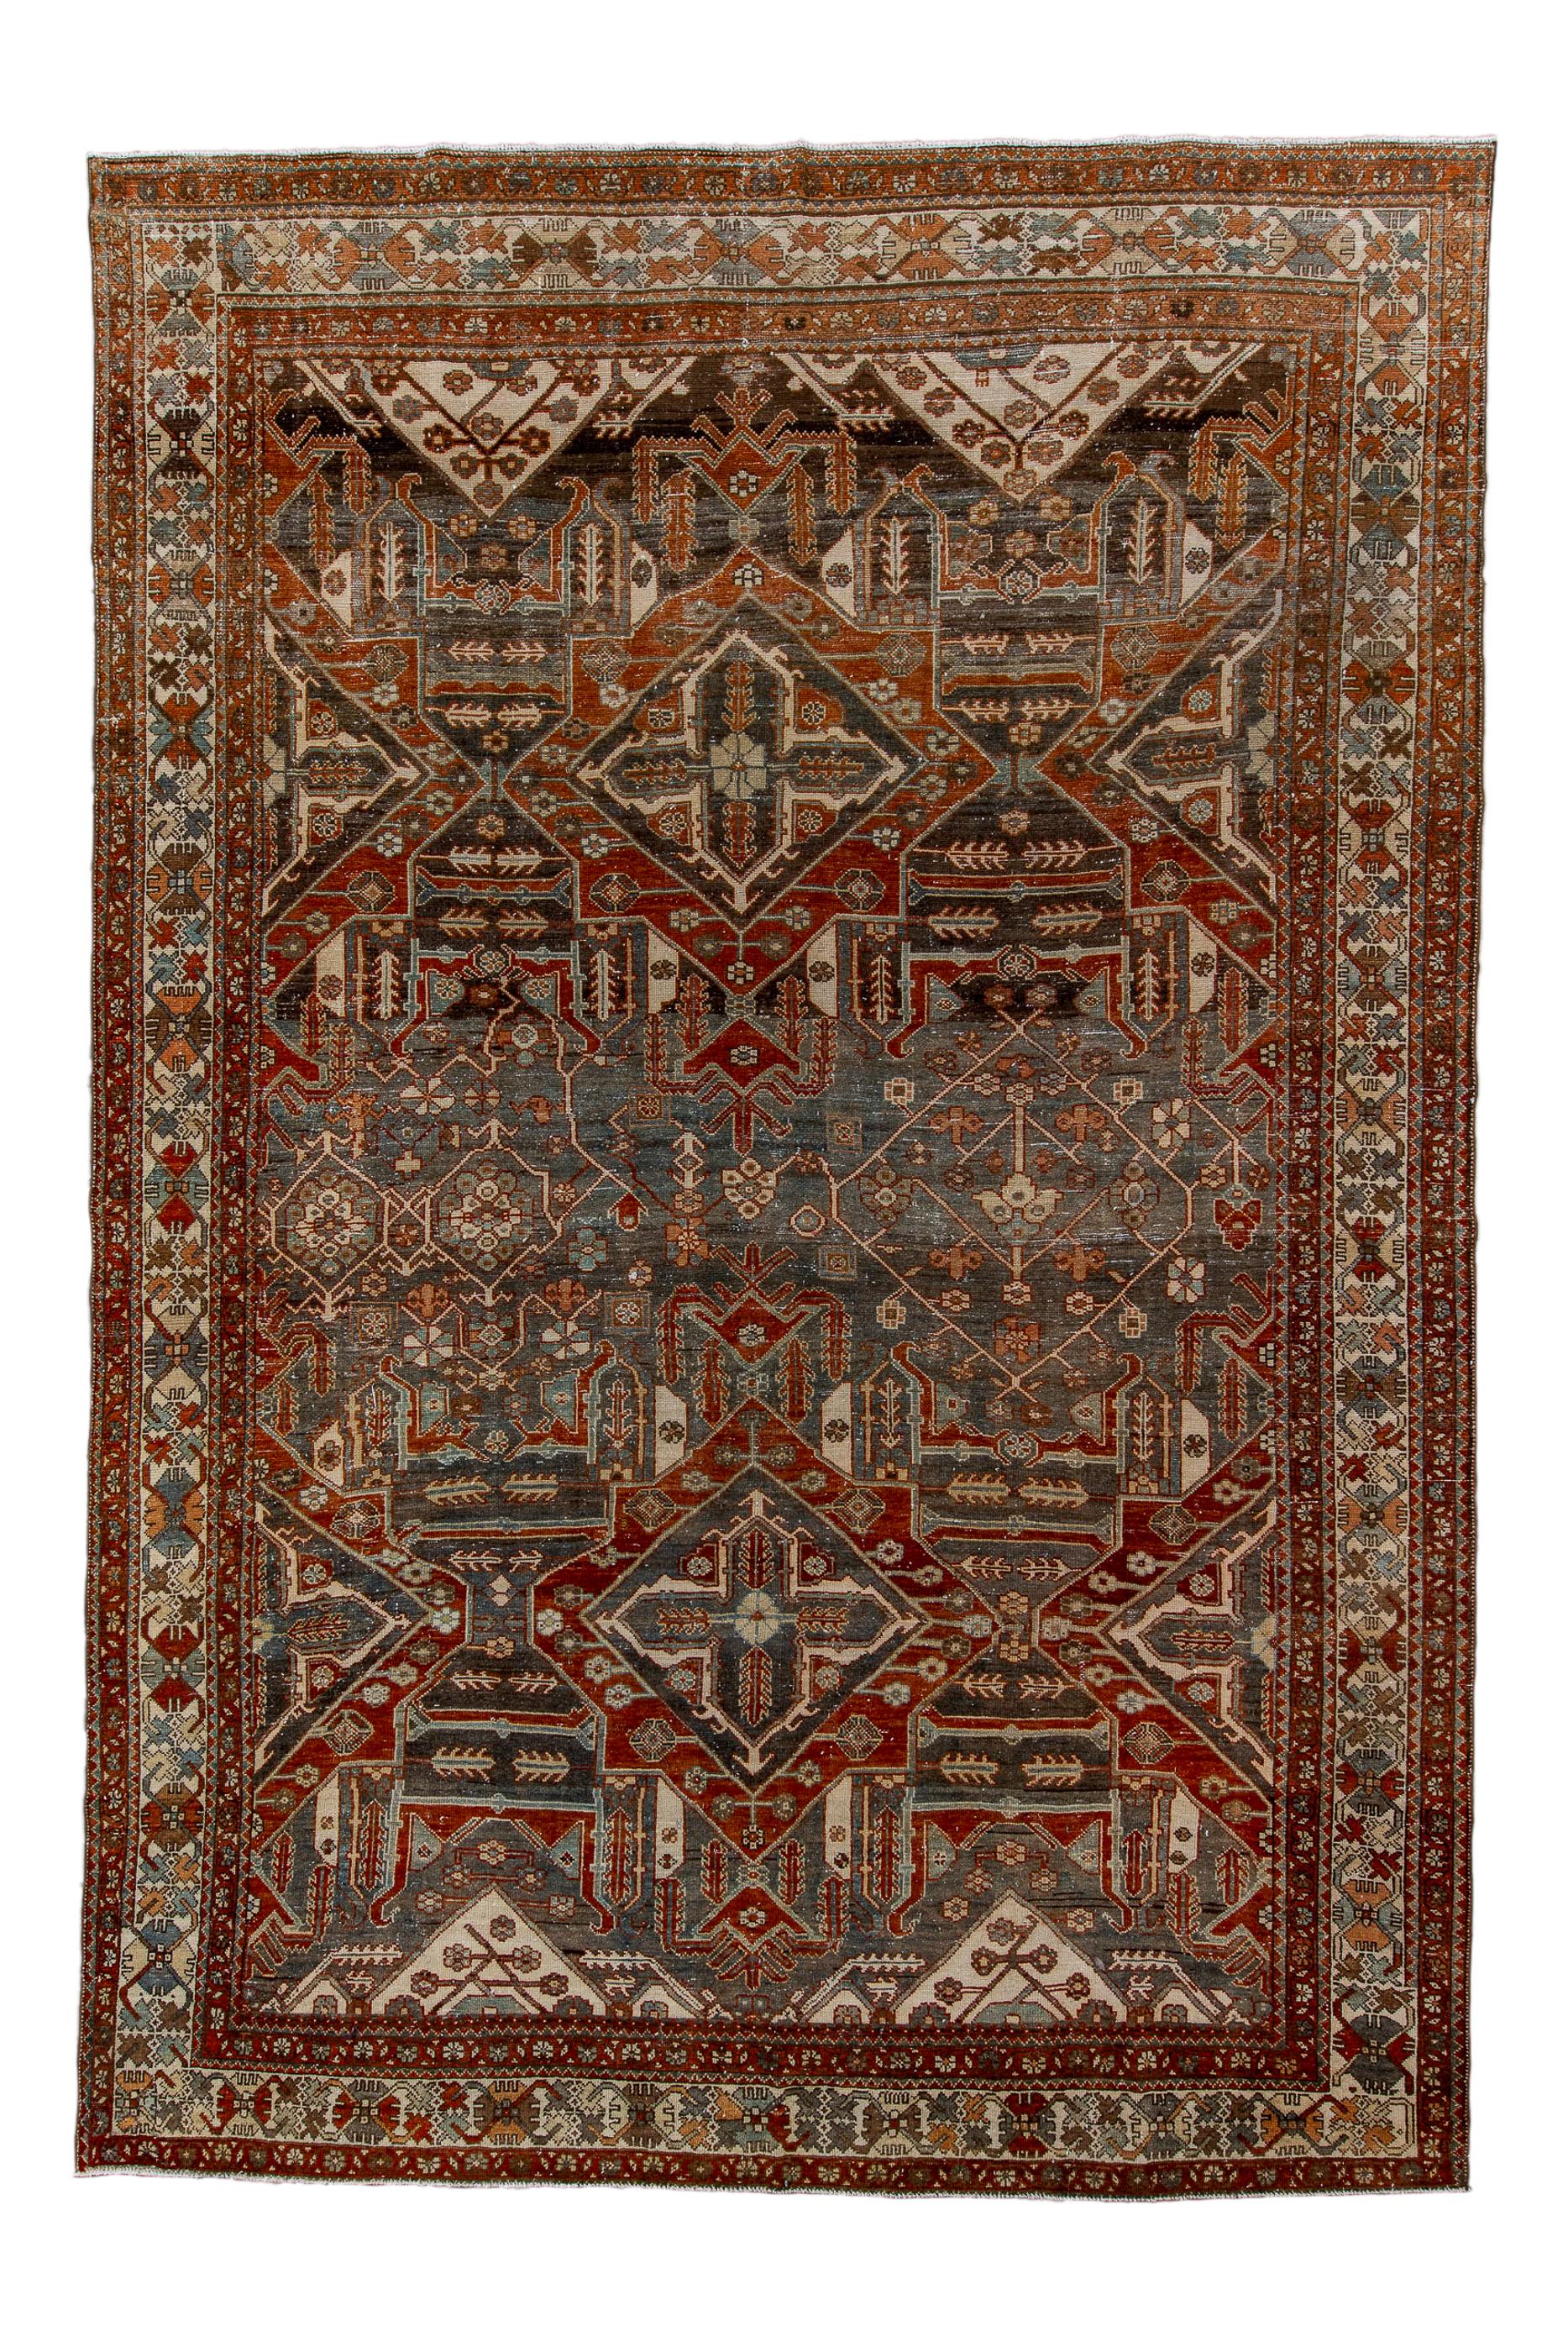 This village roomsize carpet shows a large allover pattern marked with two rows of characteristic Baktiary octogrammes each enclosing a pointed cross with four interior radiating palmettes.  Strongly abrashed dark slate field.  Ecru triangles above